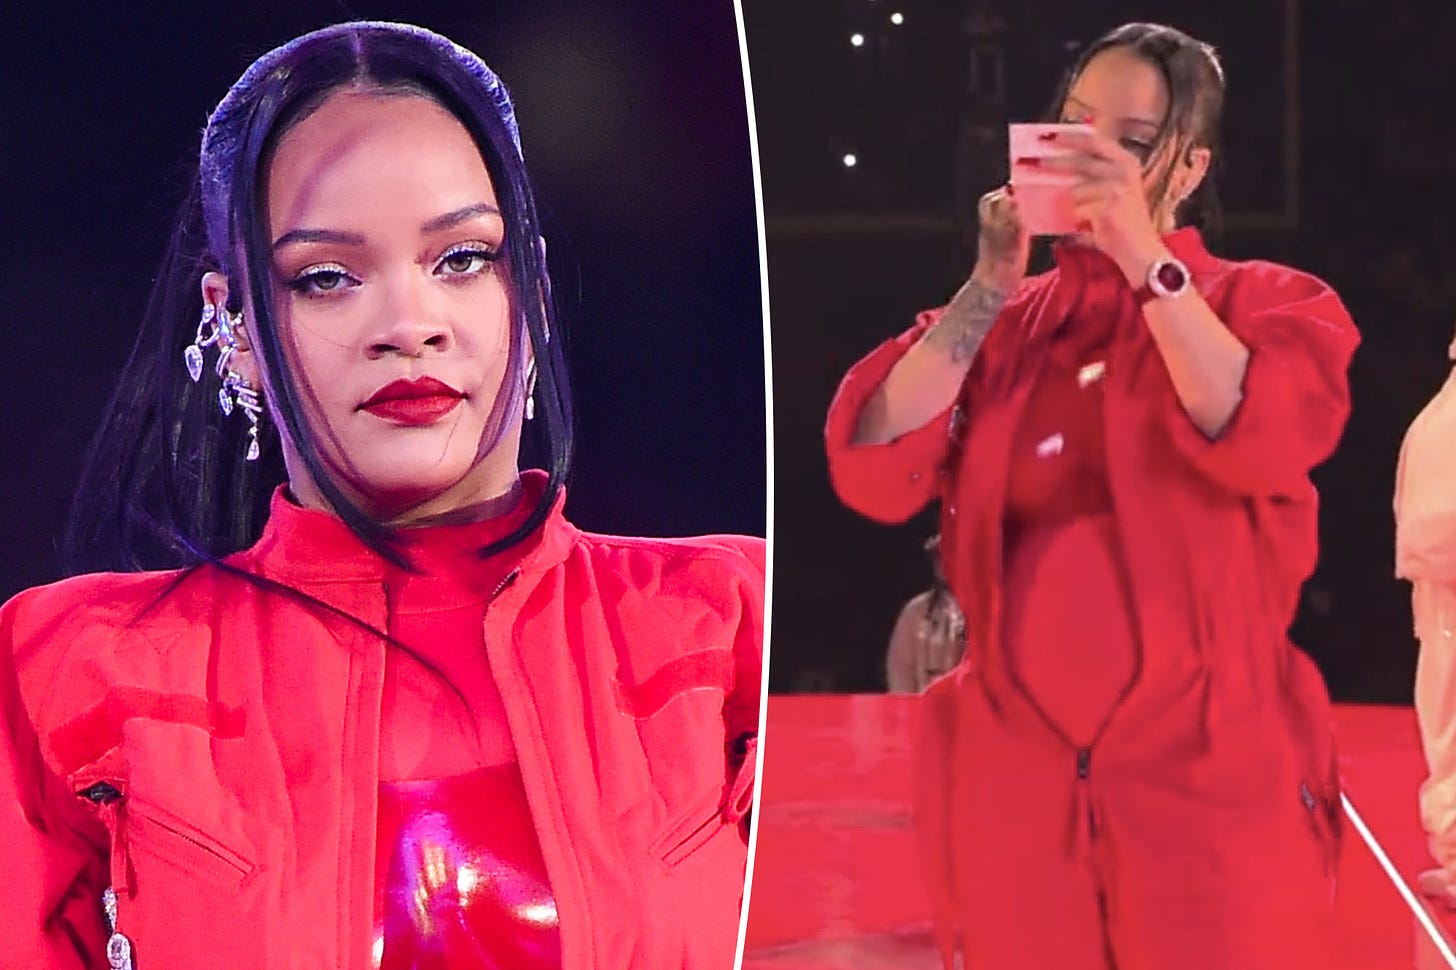 Details on Rihanna's 'iconic' Fenty Beauty look for Super Bowl 2023